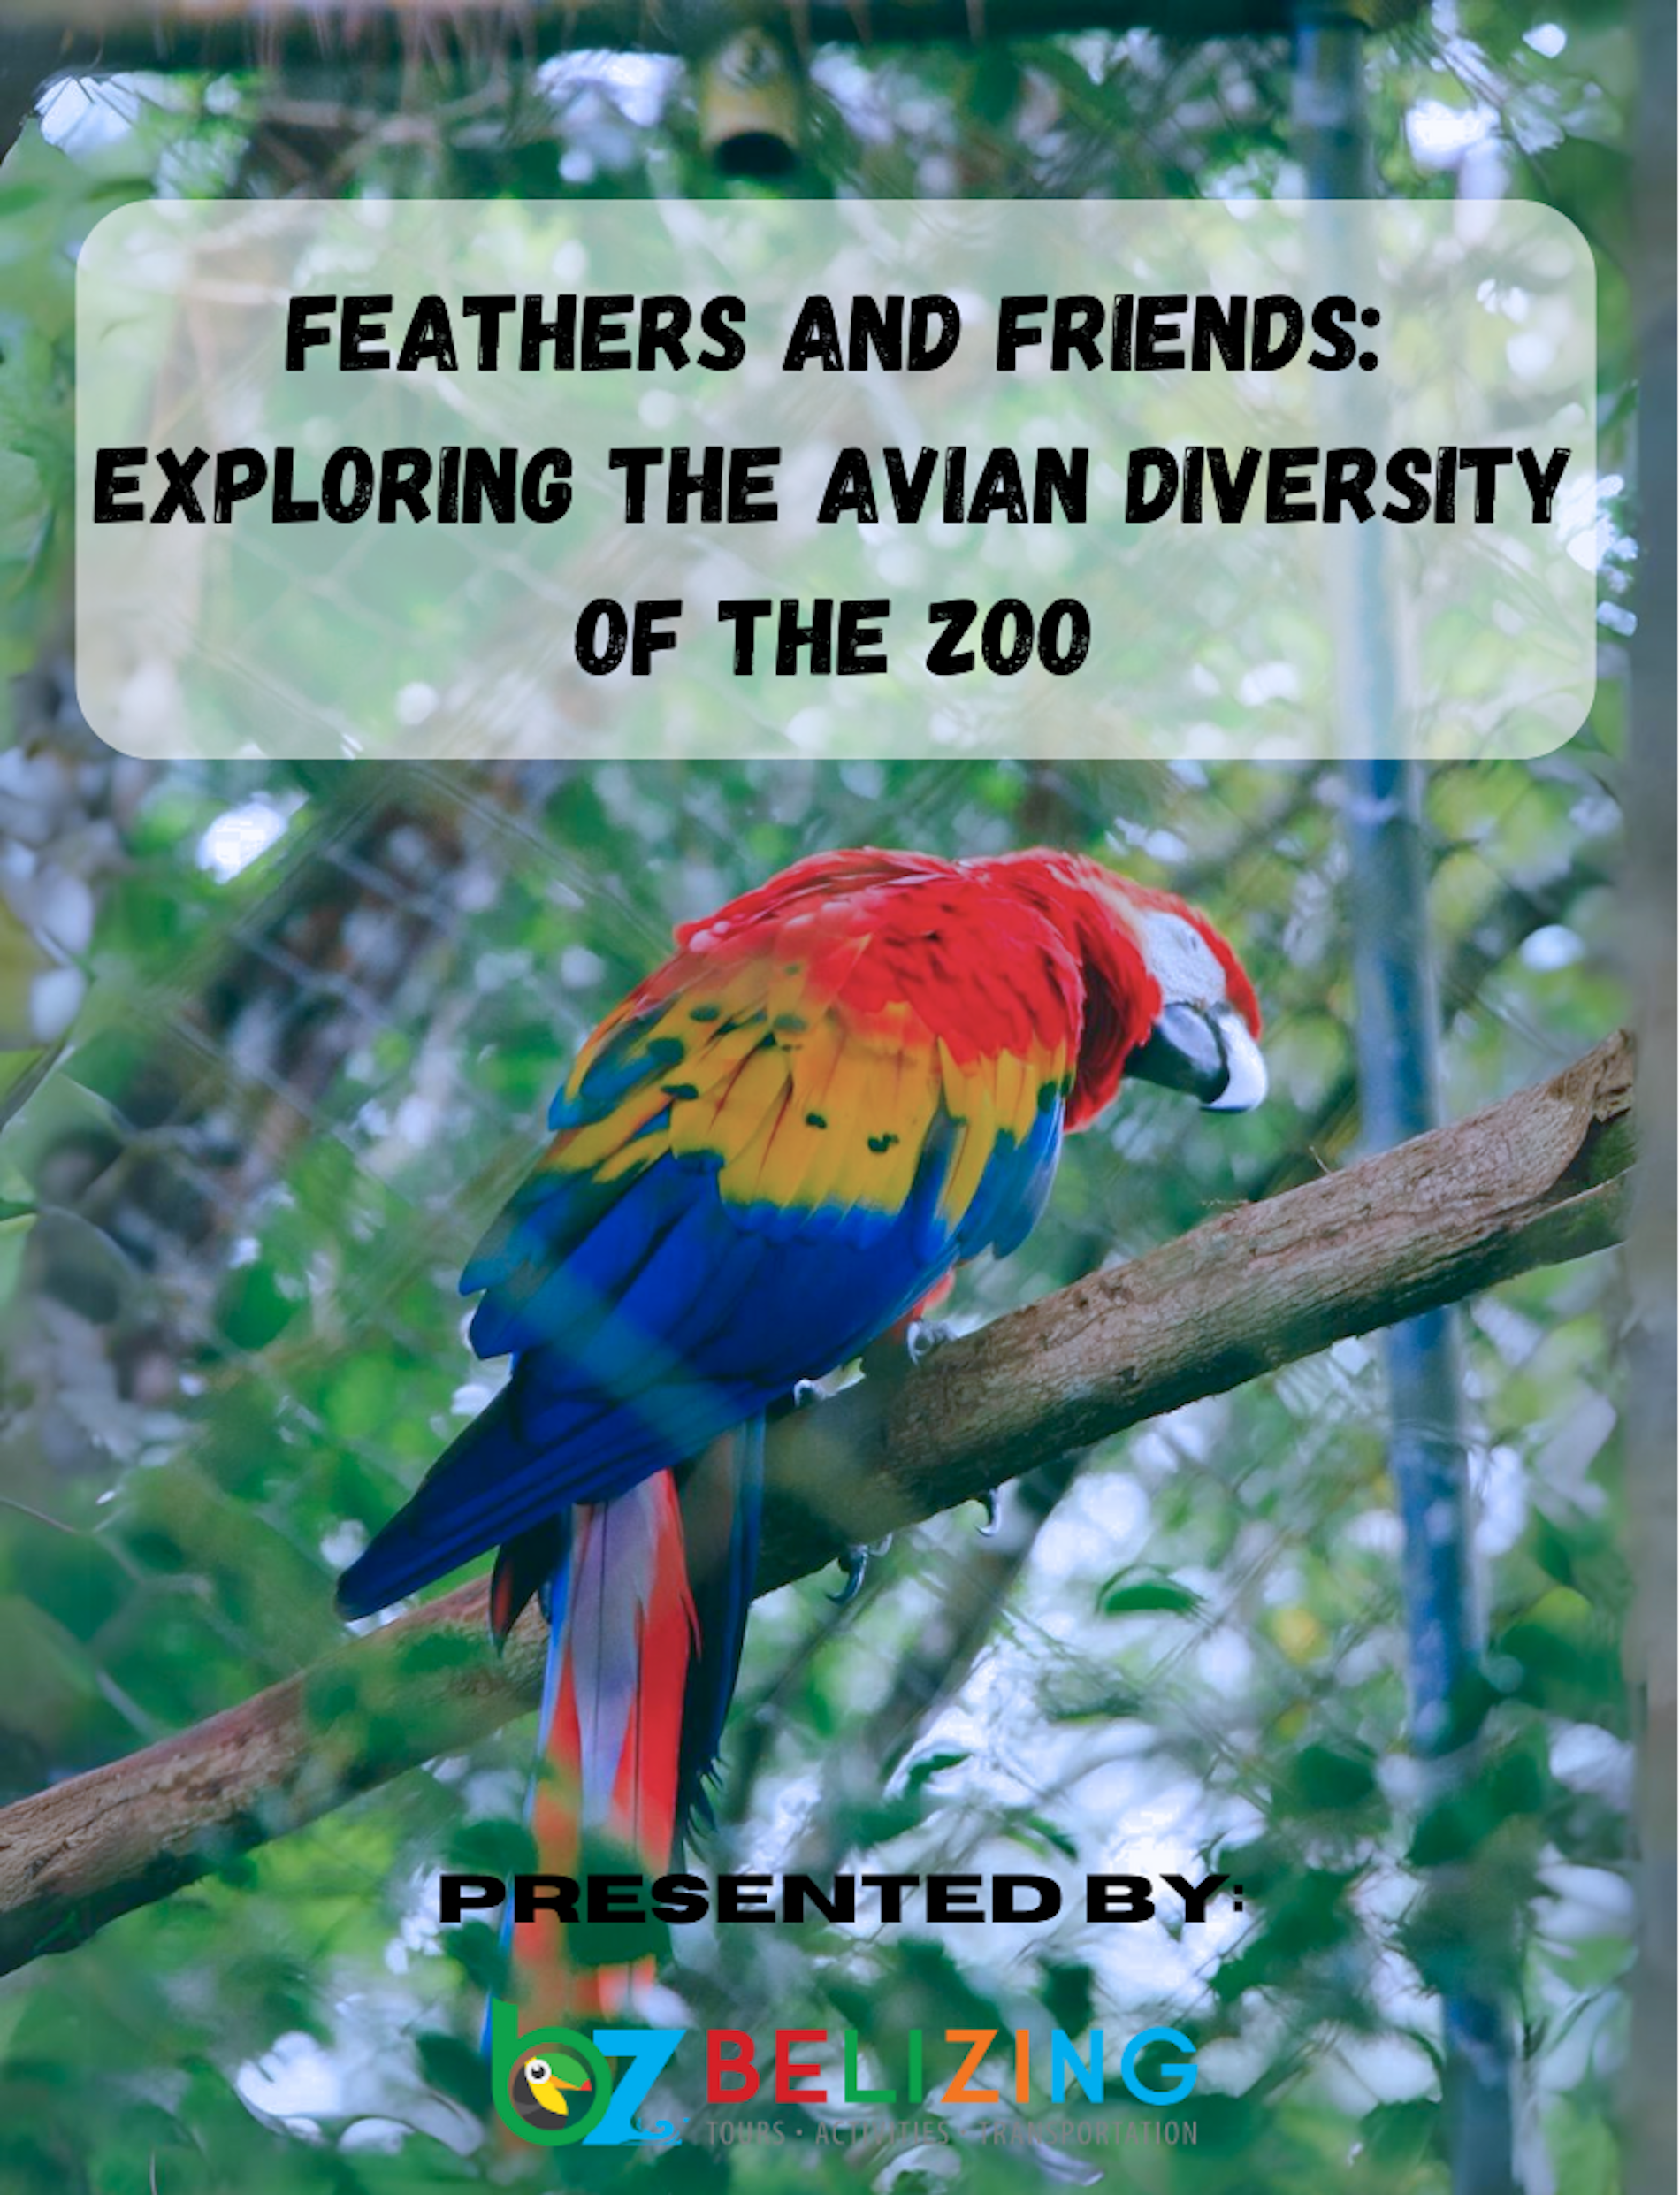 Feathers and Friends: Exploring the Avian Diversity of the Zoo